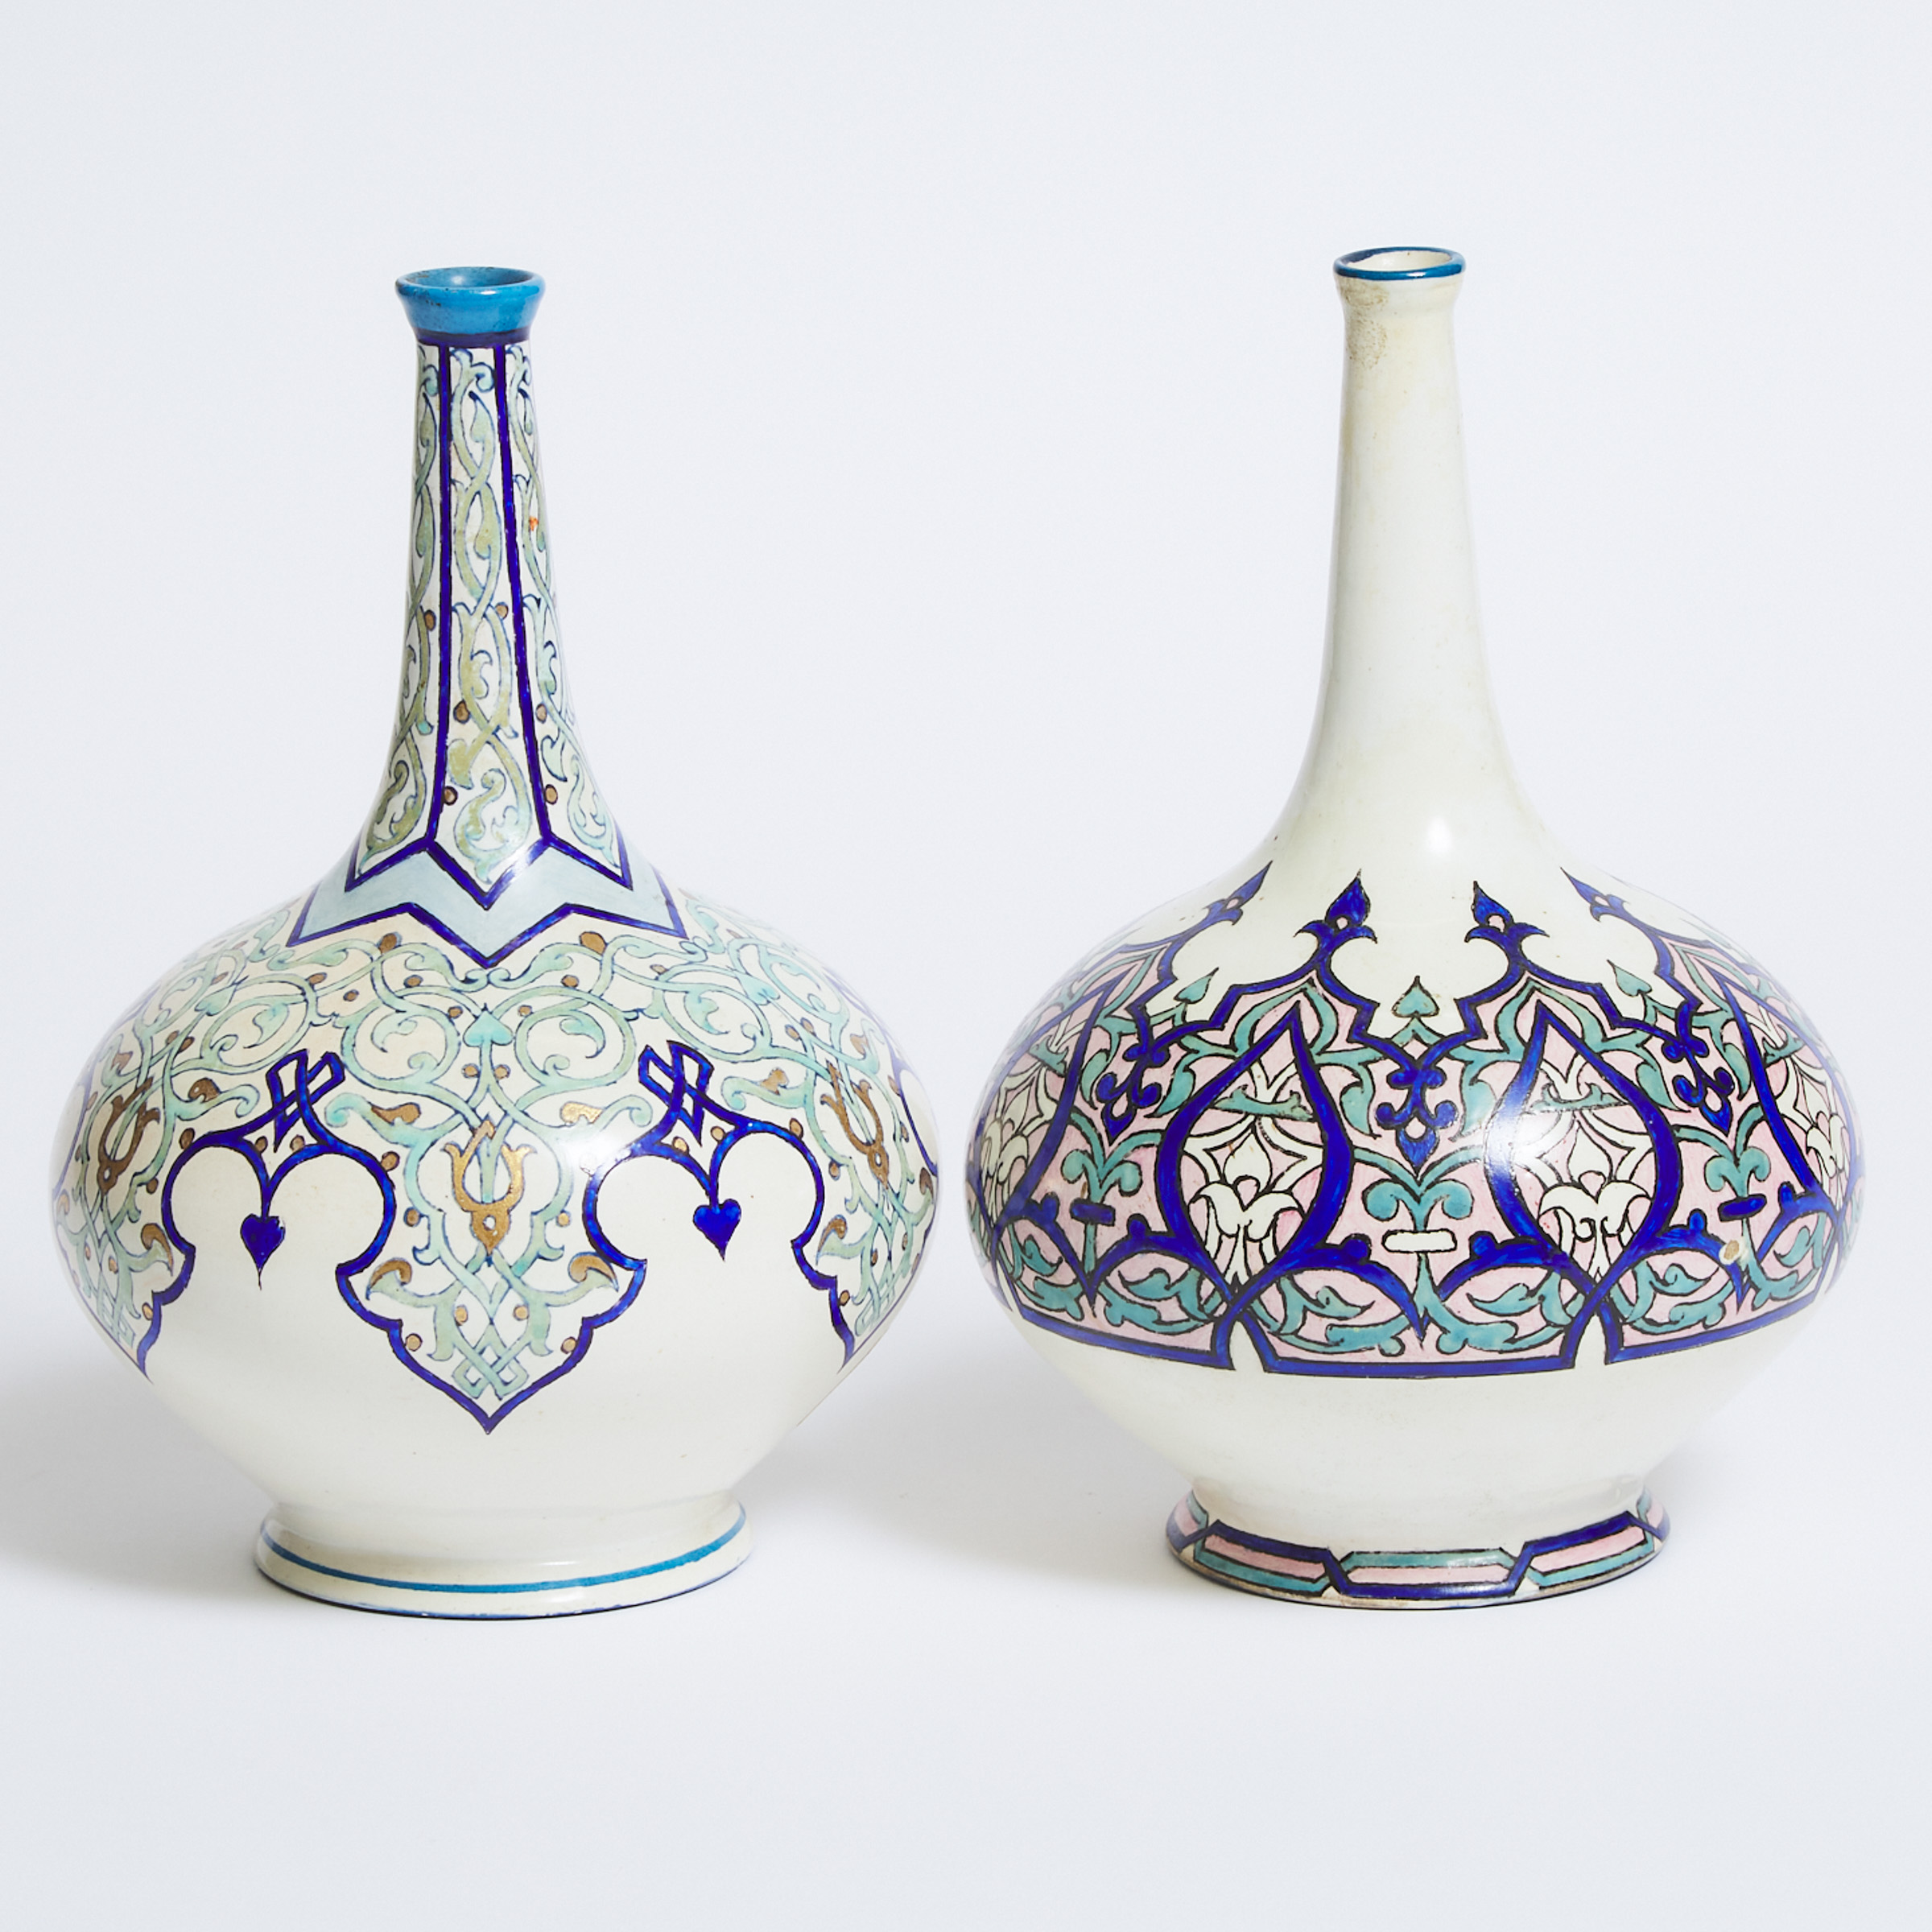 Pair of English Earthenware Persian-Style Painted Vases, late 19th century